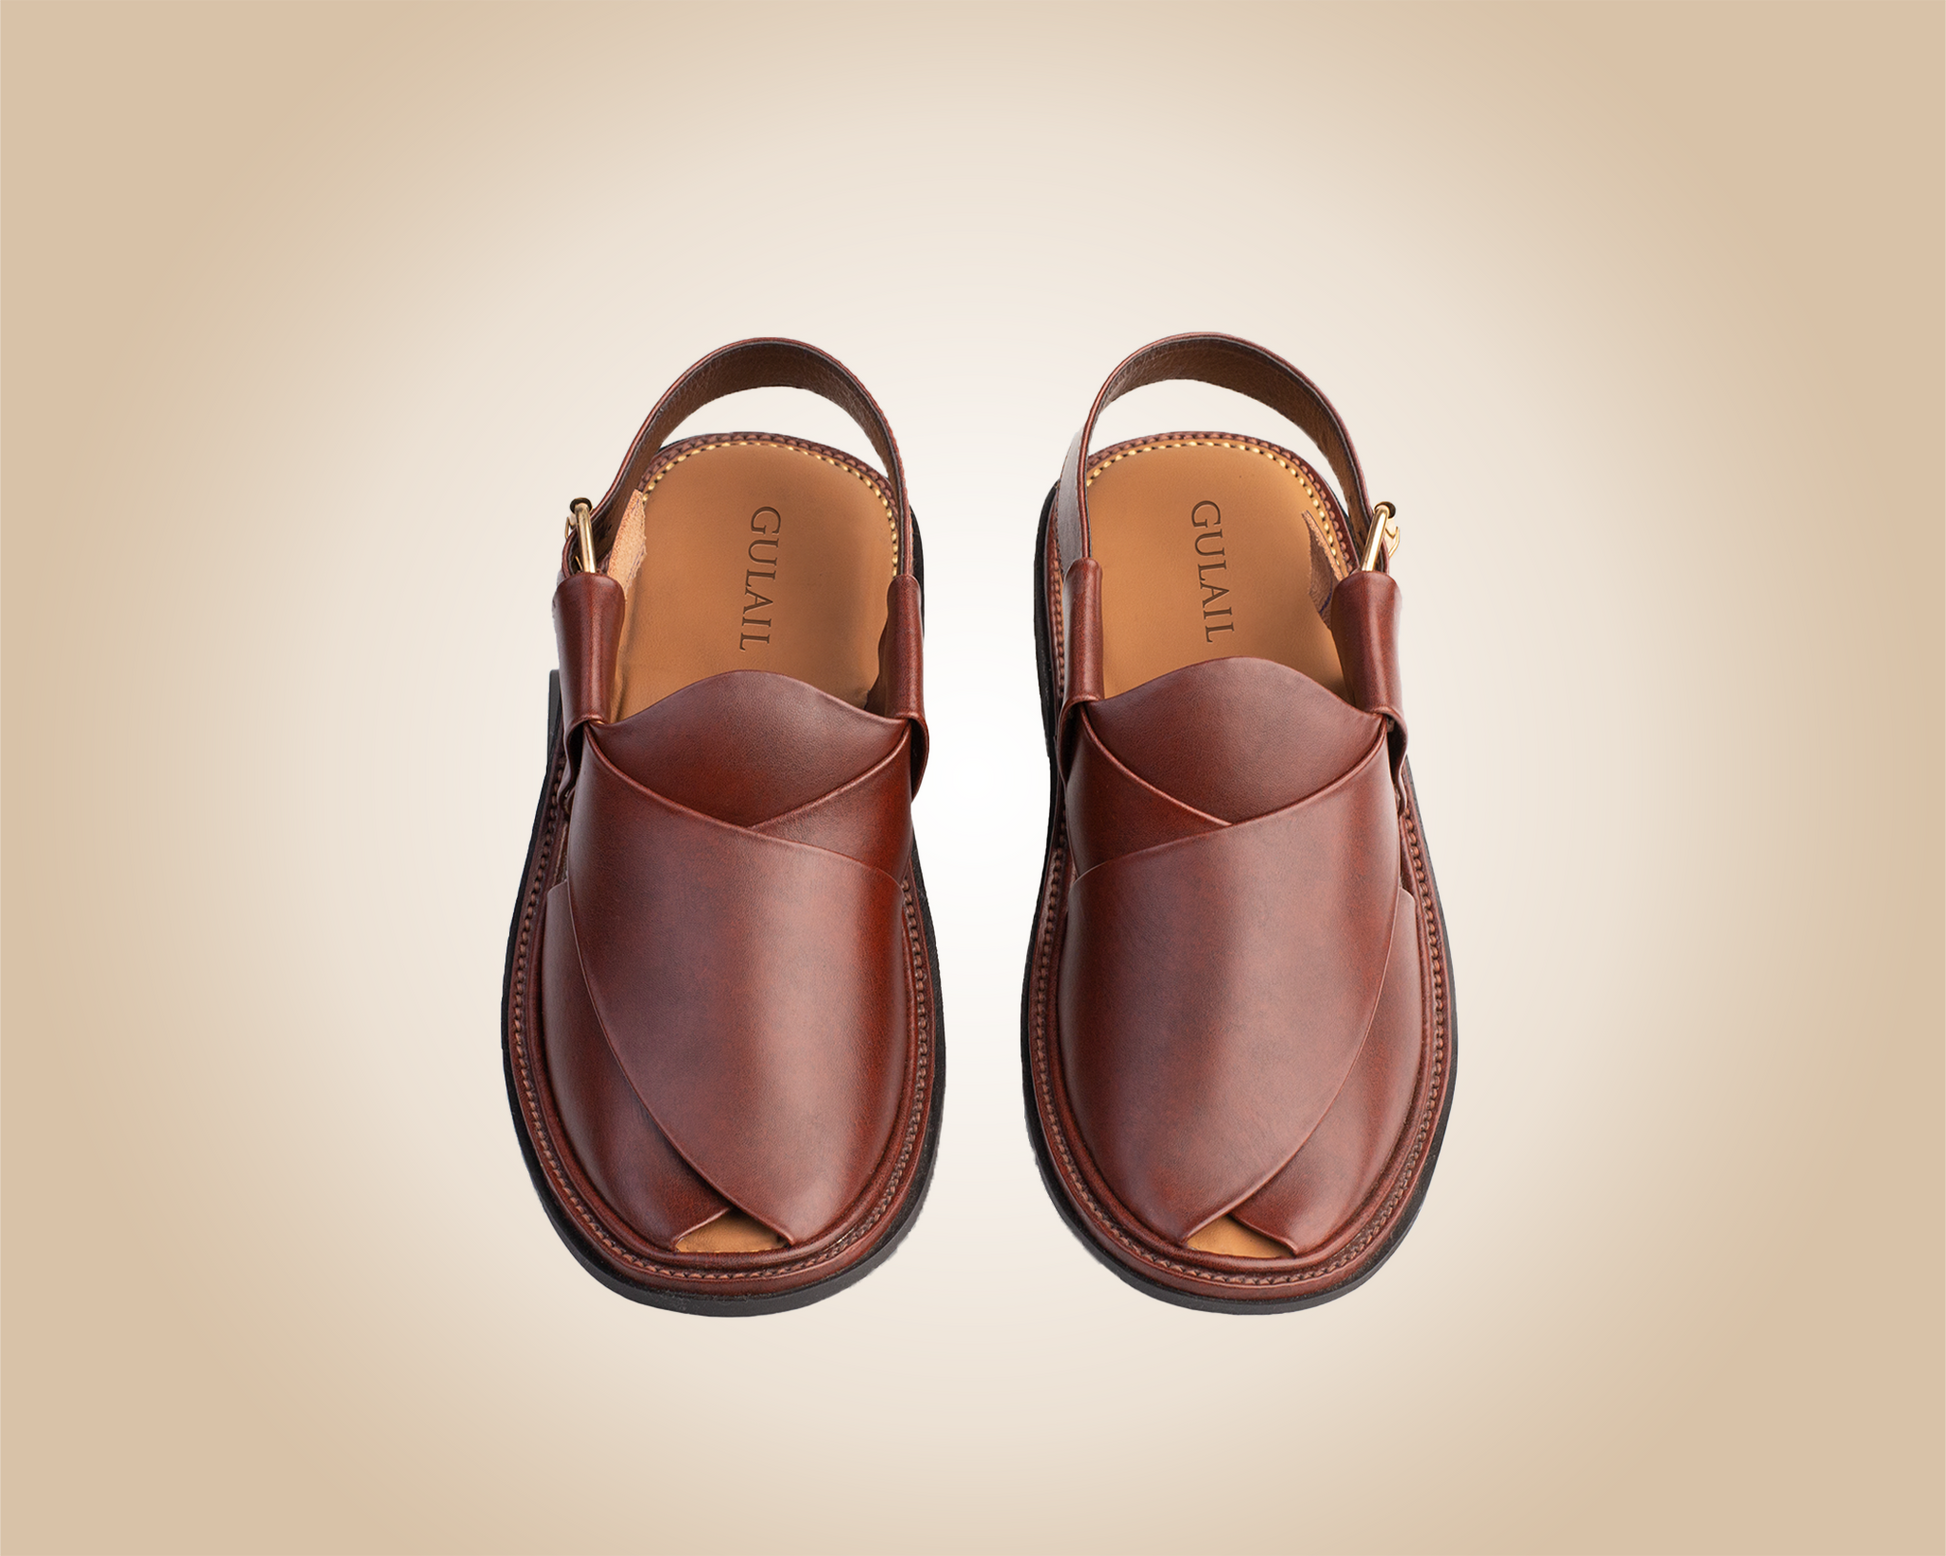 "Round Shape Brown Saply sandals, known as Peshawari Chappal, featuring traditional leather craftsmanship."